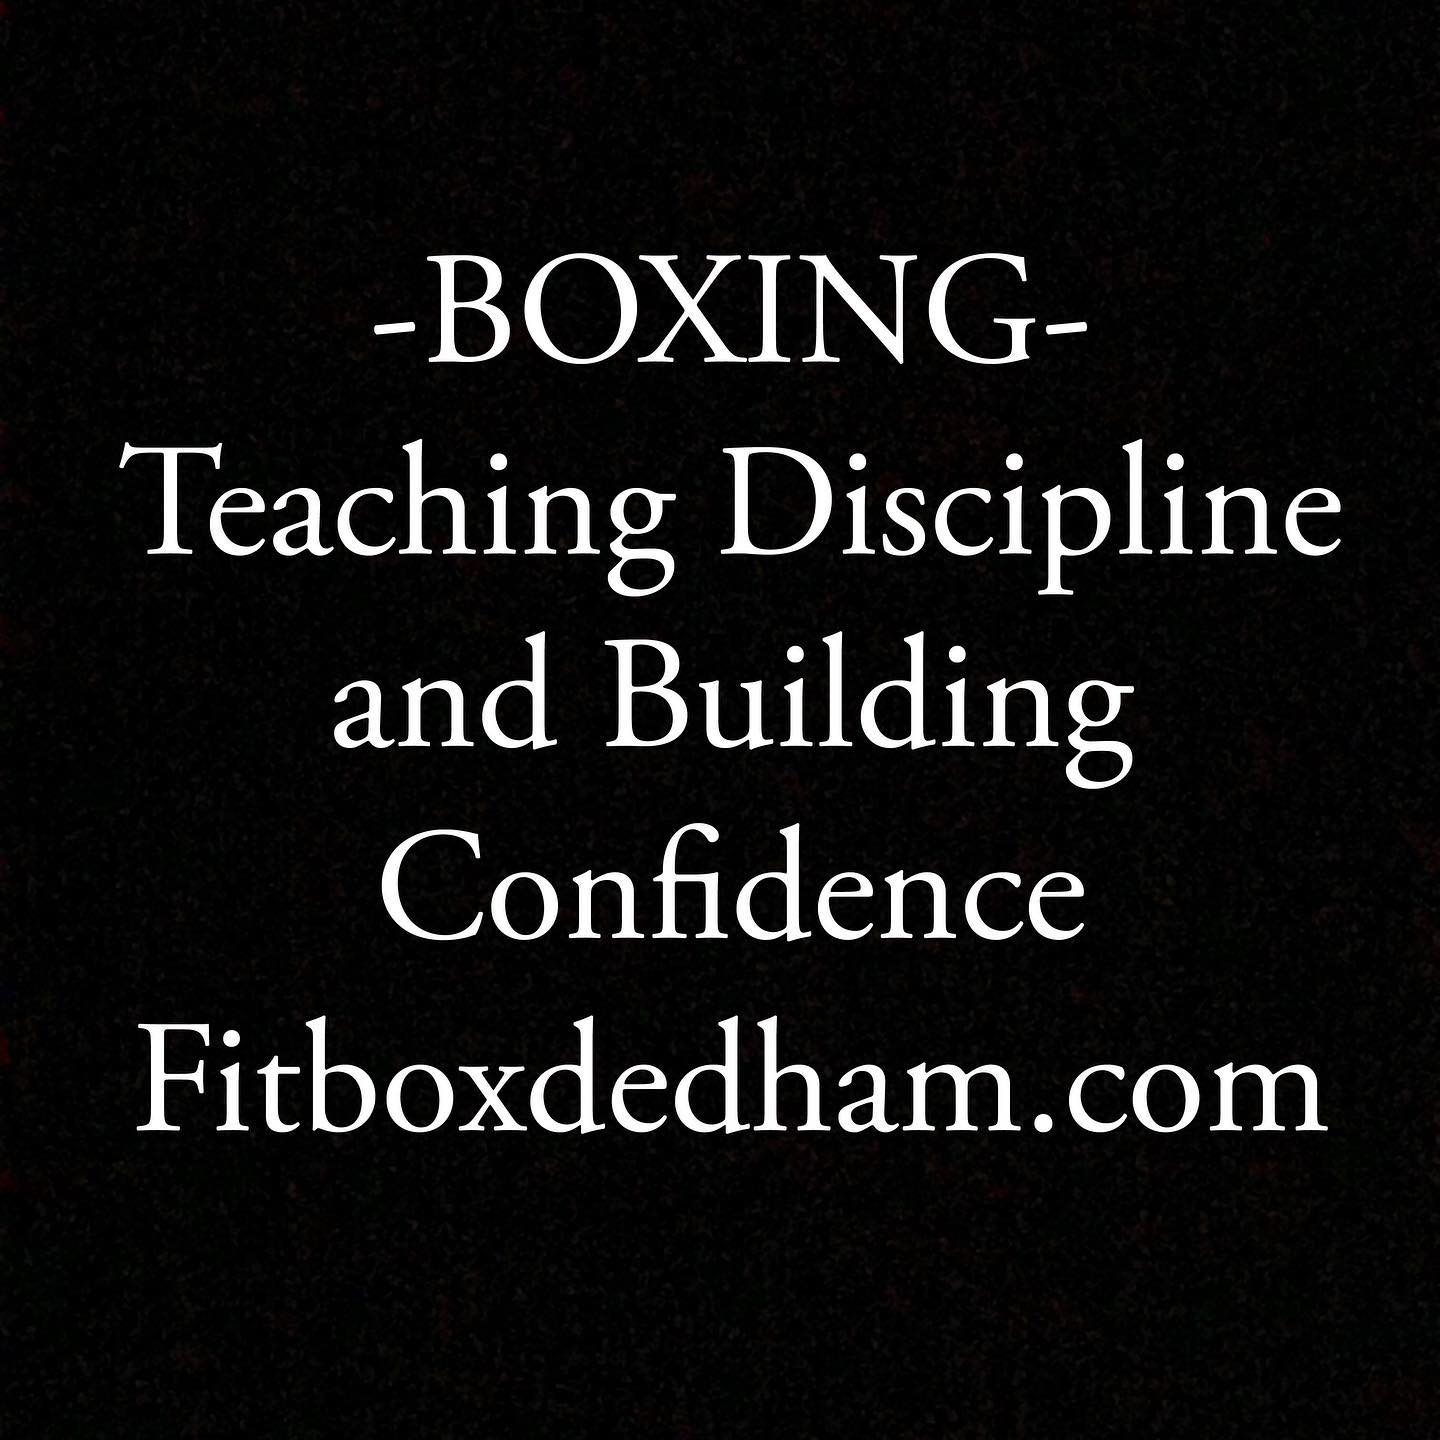 We are back doing what we do best teaching discipline and building confidence through Boxing workouts . Contact us for more information and how to schedule a free boxing workout call/text (782)727-9503 or email fitbox@outlook.com